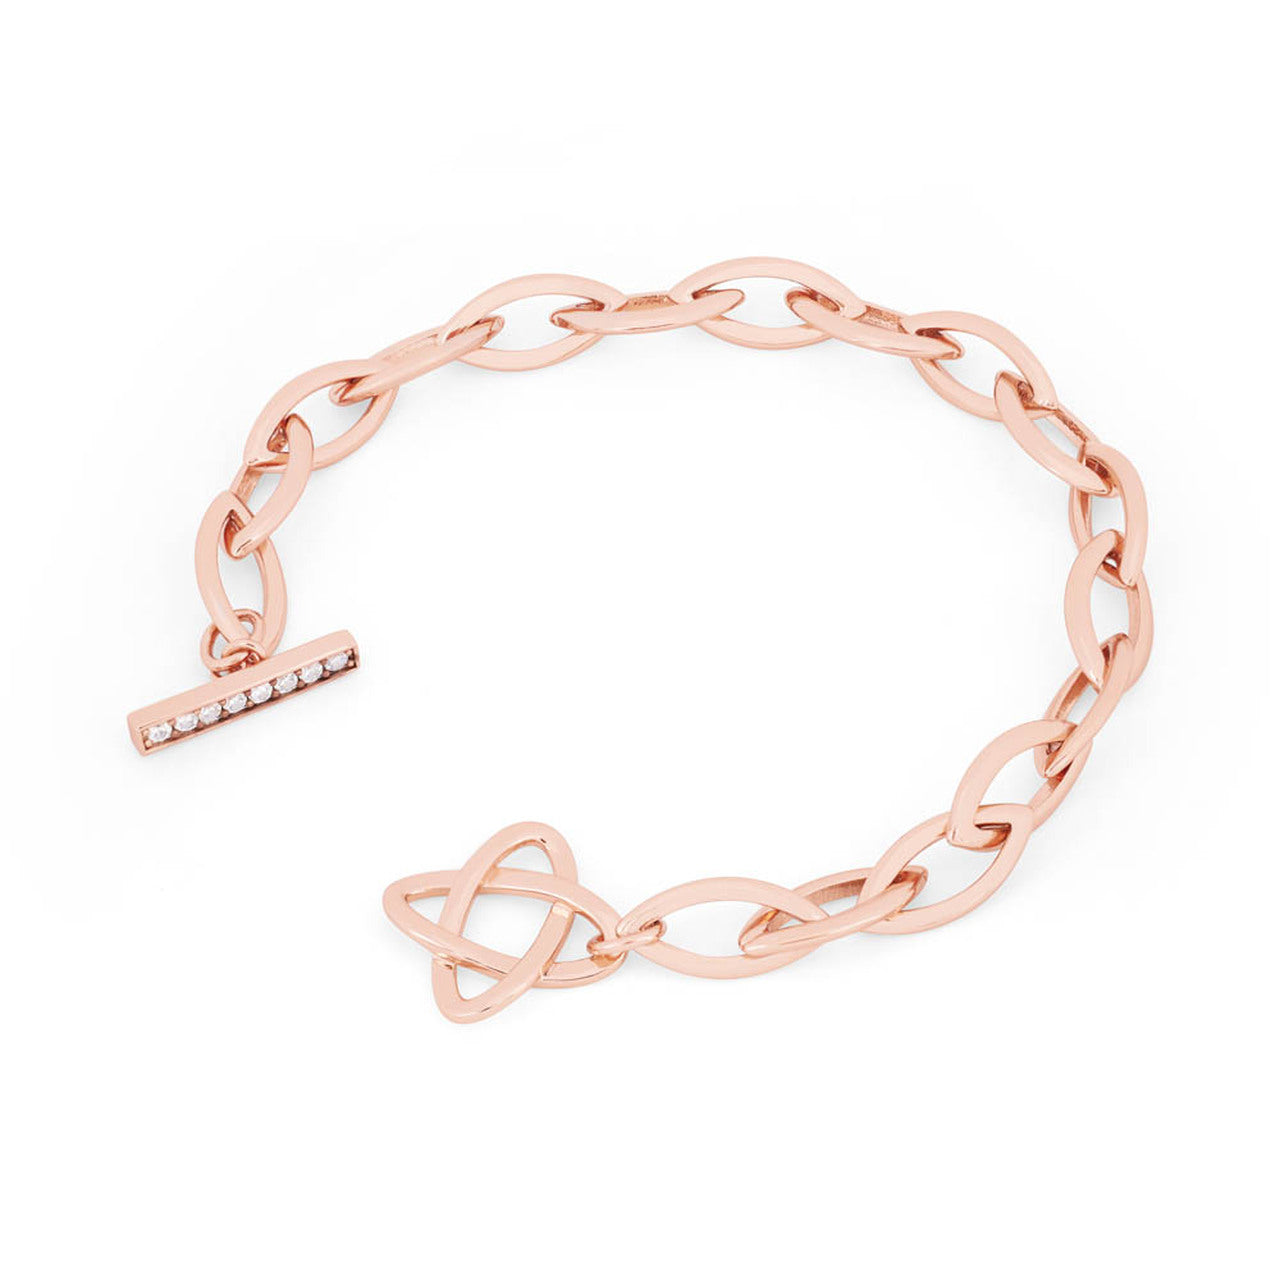 T-Bar Leaf Chain Bracelet Rose Gold by Tipperary  The chain on this magnificent bracelet emulates a Leaf shape, crafted from Rose gold and finsihed off with a Crystal inlaid Bar that acts as the closing mechanism. A real classic.